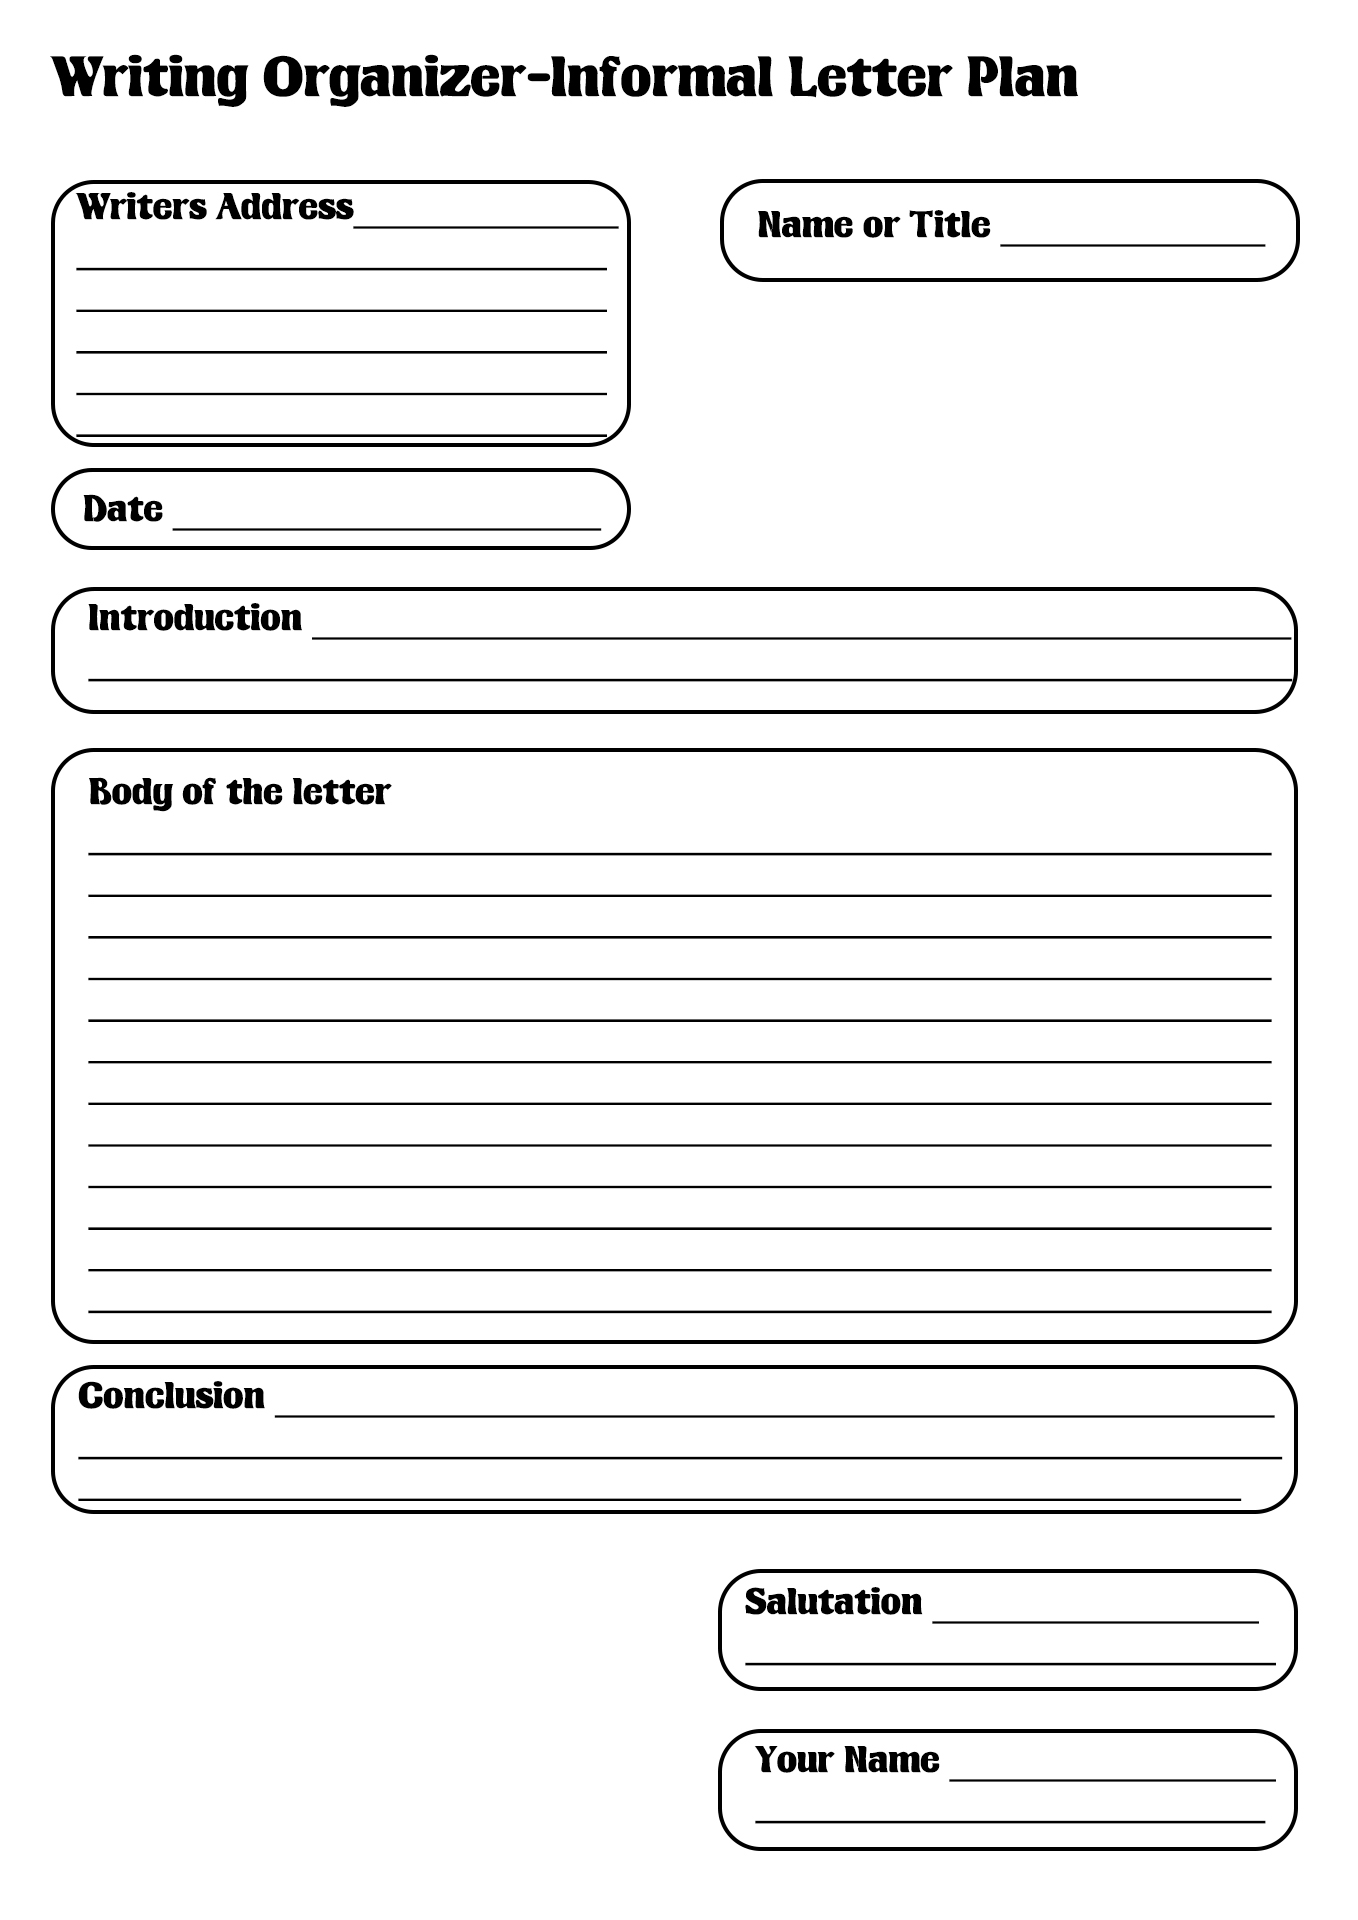 Free Business Letter-Writing Worksheets Image